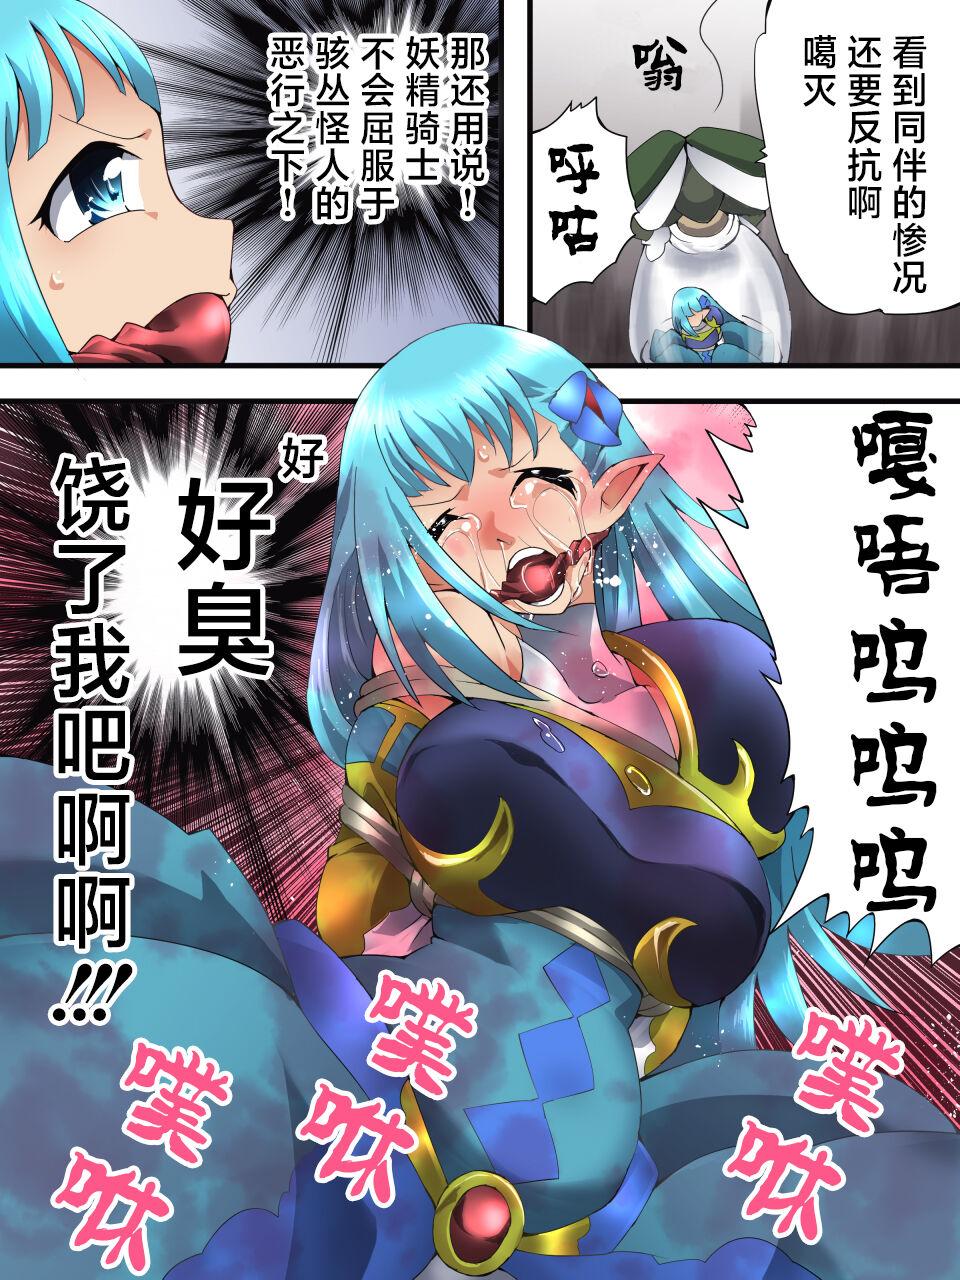 Fairy Knight Fairy Bloom Ep3 Chinese Ver. 10